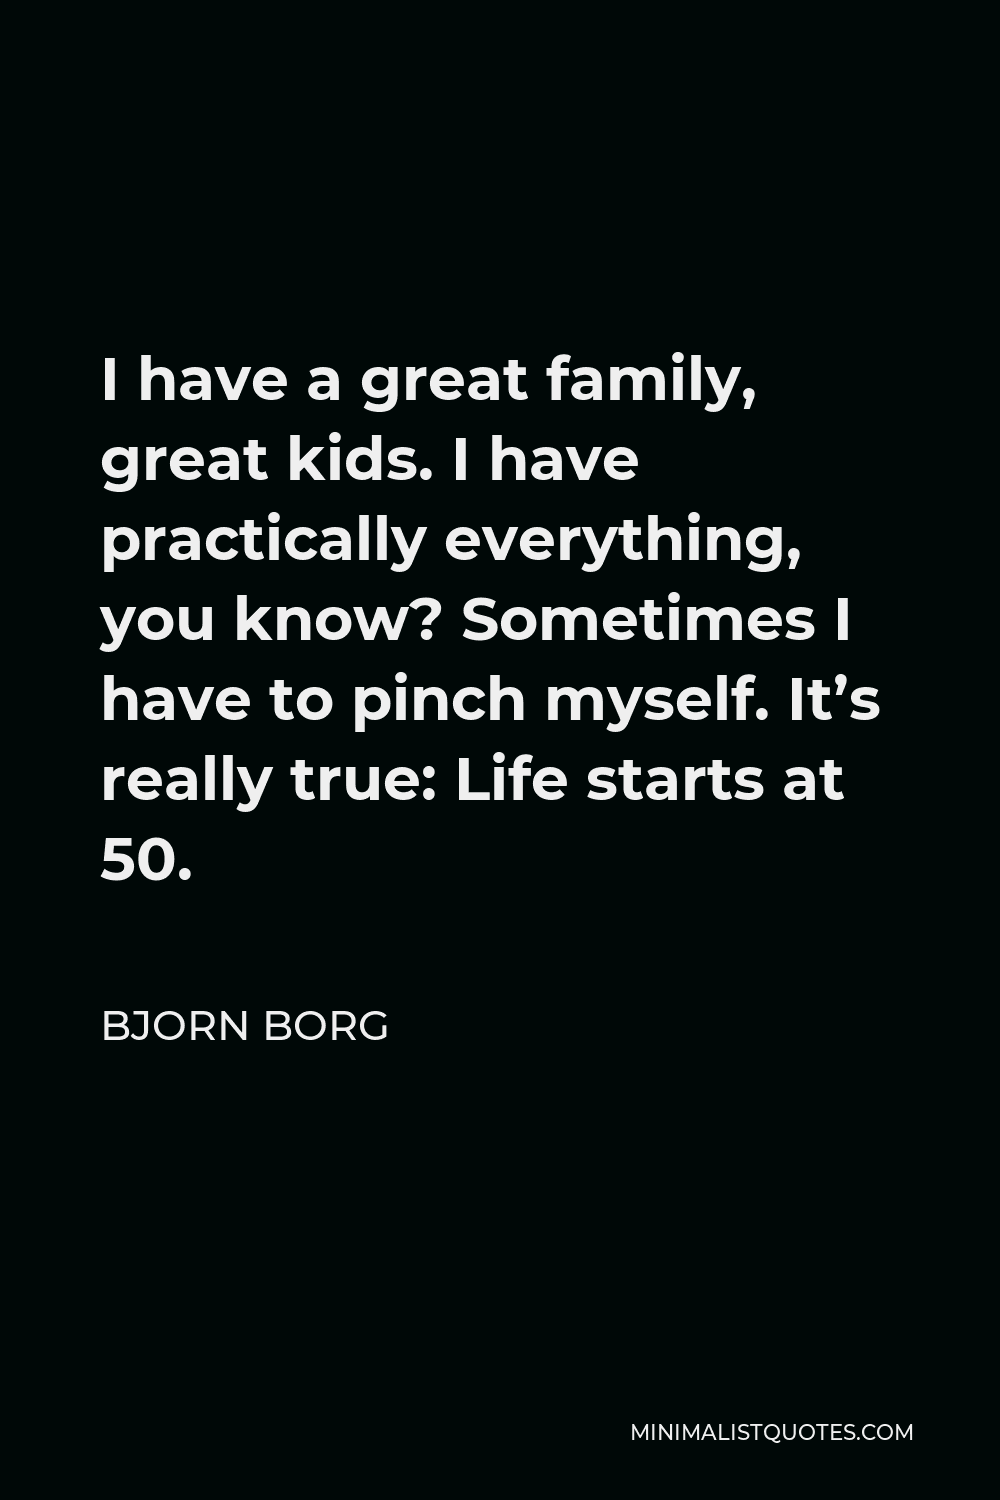 Bjorn Borg Quote - I have a great family, great kids. I have practically everything, you know? Sometimes I have to pinch myself. It’s really true: Life starts at 50.